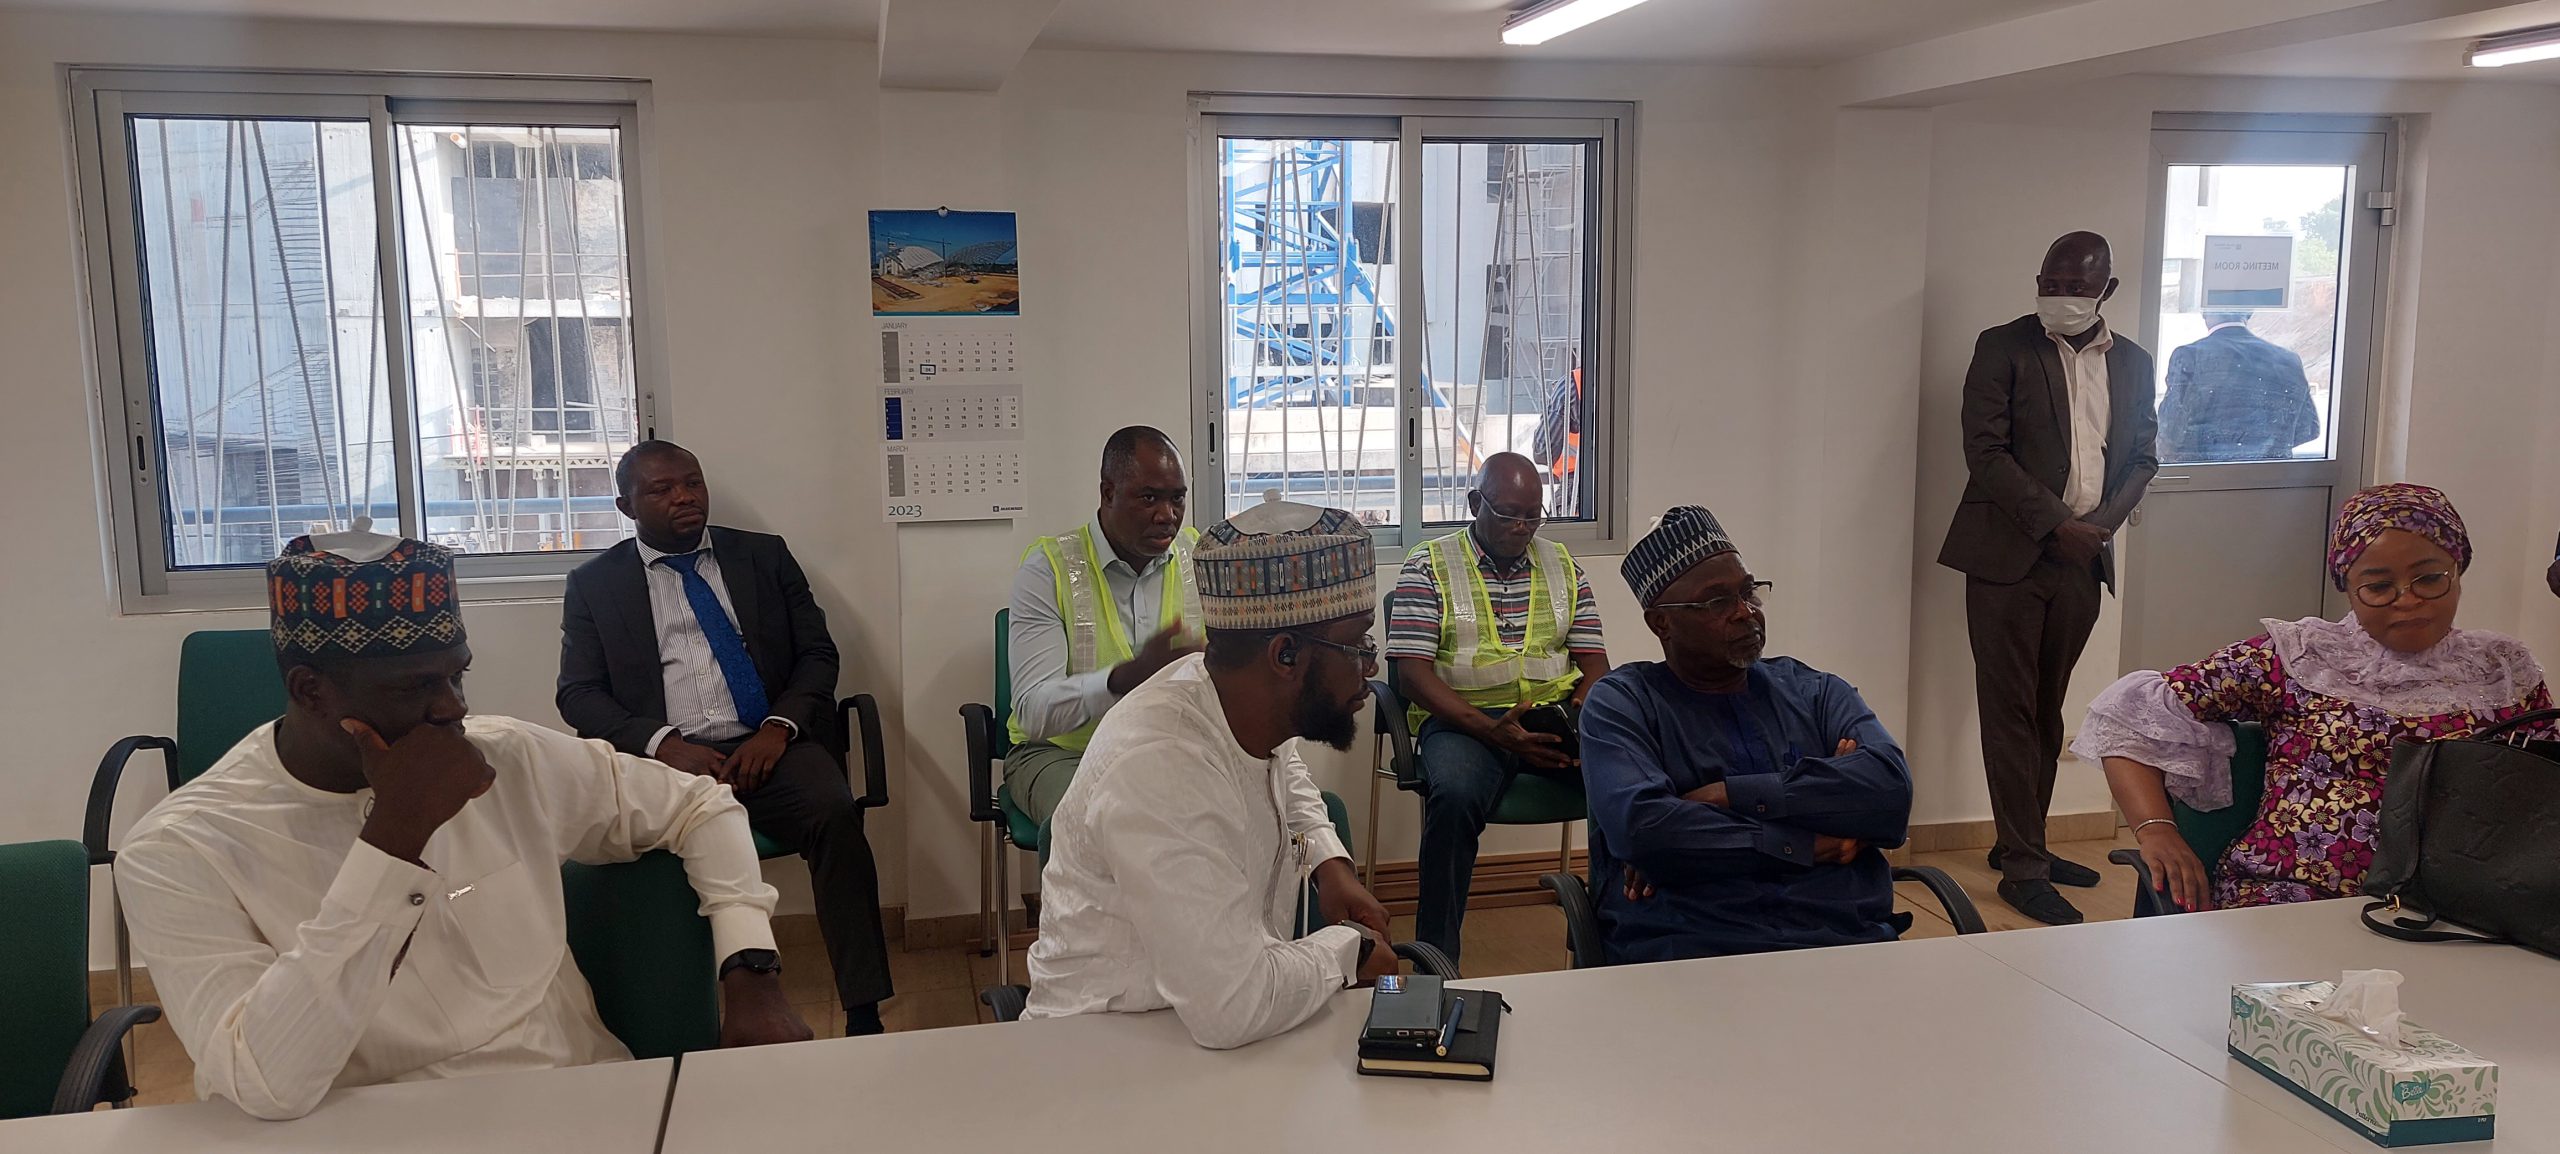 Photonews: The NUPRC Board Chairman Malam Isa Modibbo with the Commission Chief Executive Engr Gbenga Komolafe FNSE in company of the project management team paid a visit to the “BARREL” to inspect and ascertain the level of work at the project site.